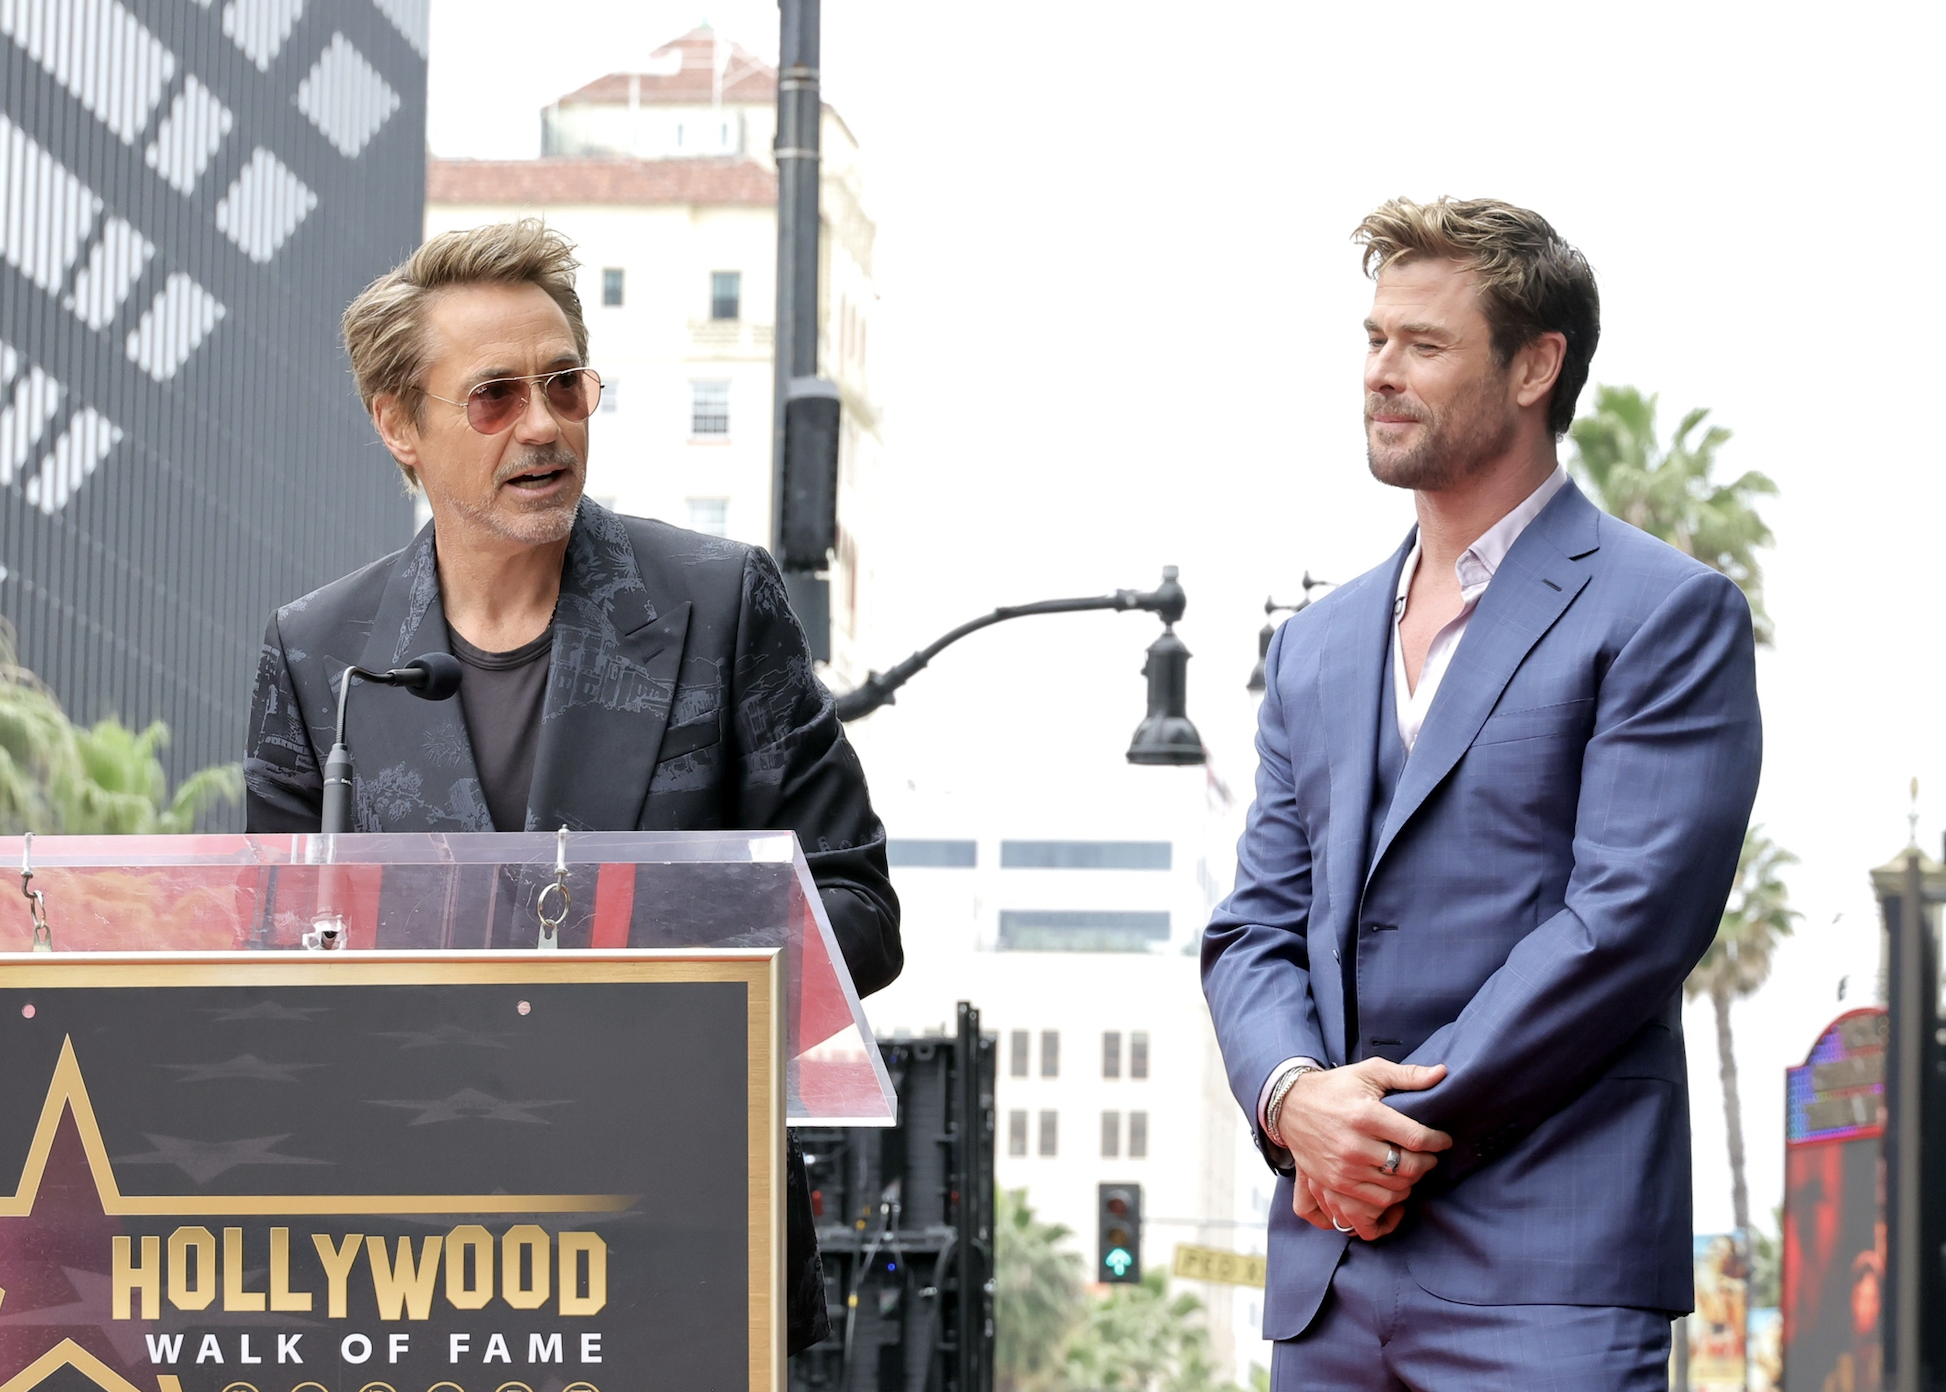 Robert Downey Jr. Roasts Chris Hemsworth by Asking ‘Avengers’ Cast to Describe ‘Thor’ Star in Three Words; Chris ...